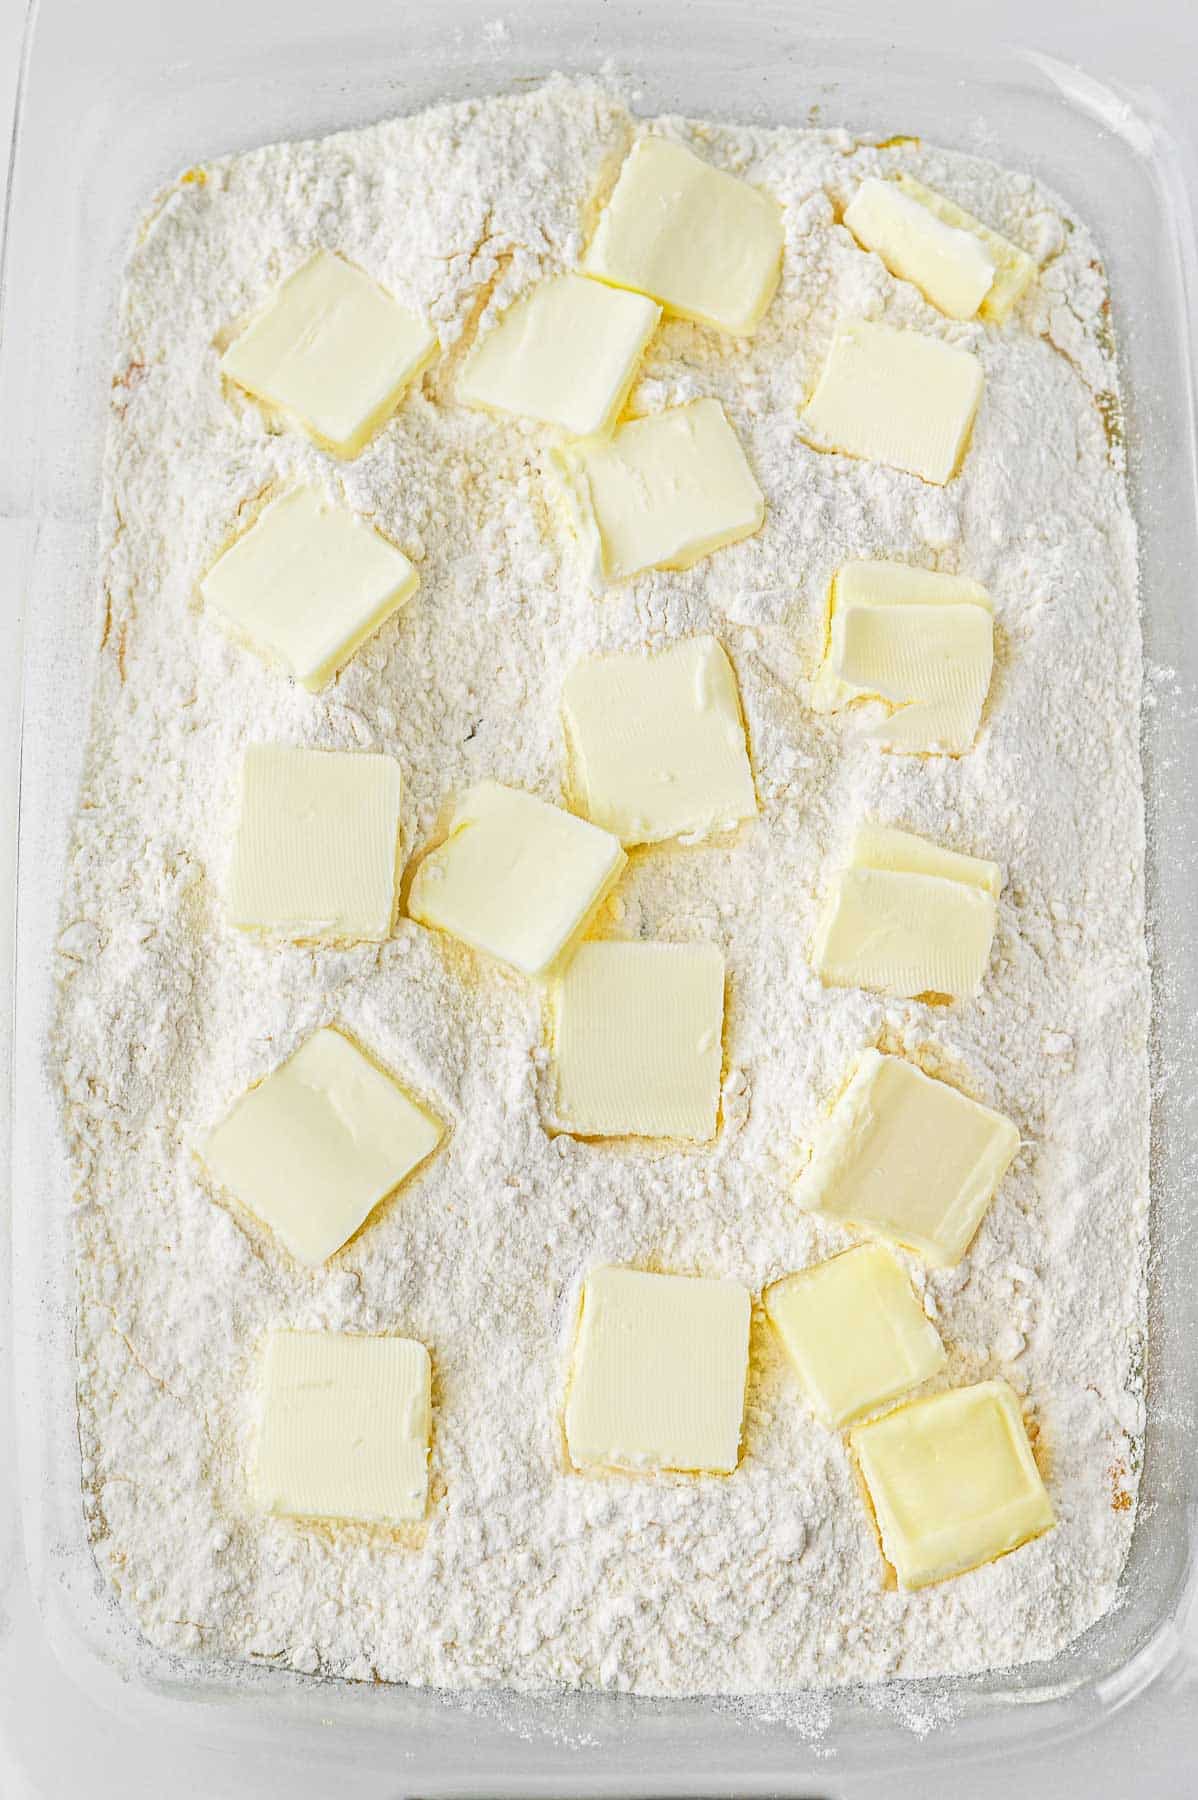 Butter slices laid over cake mix.